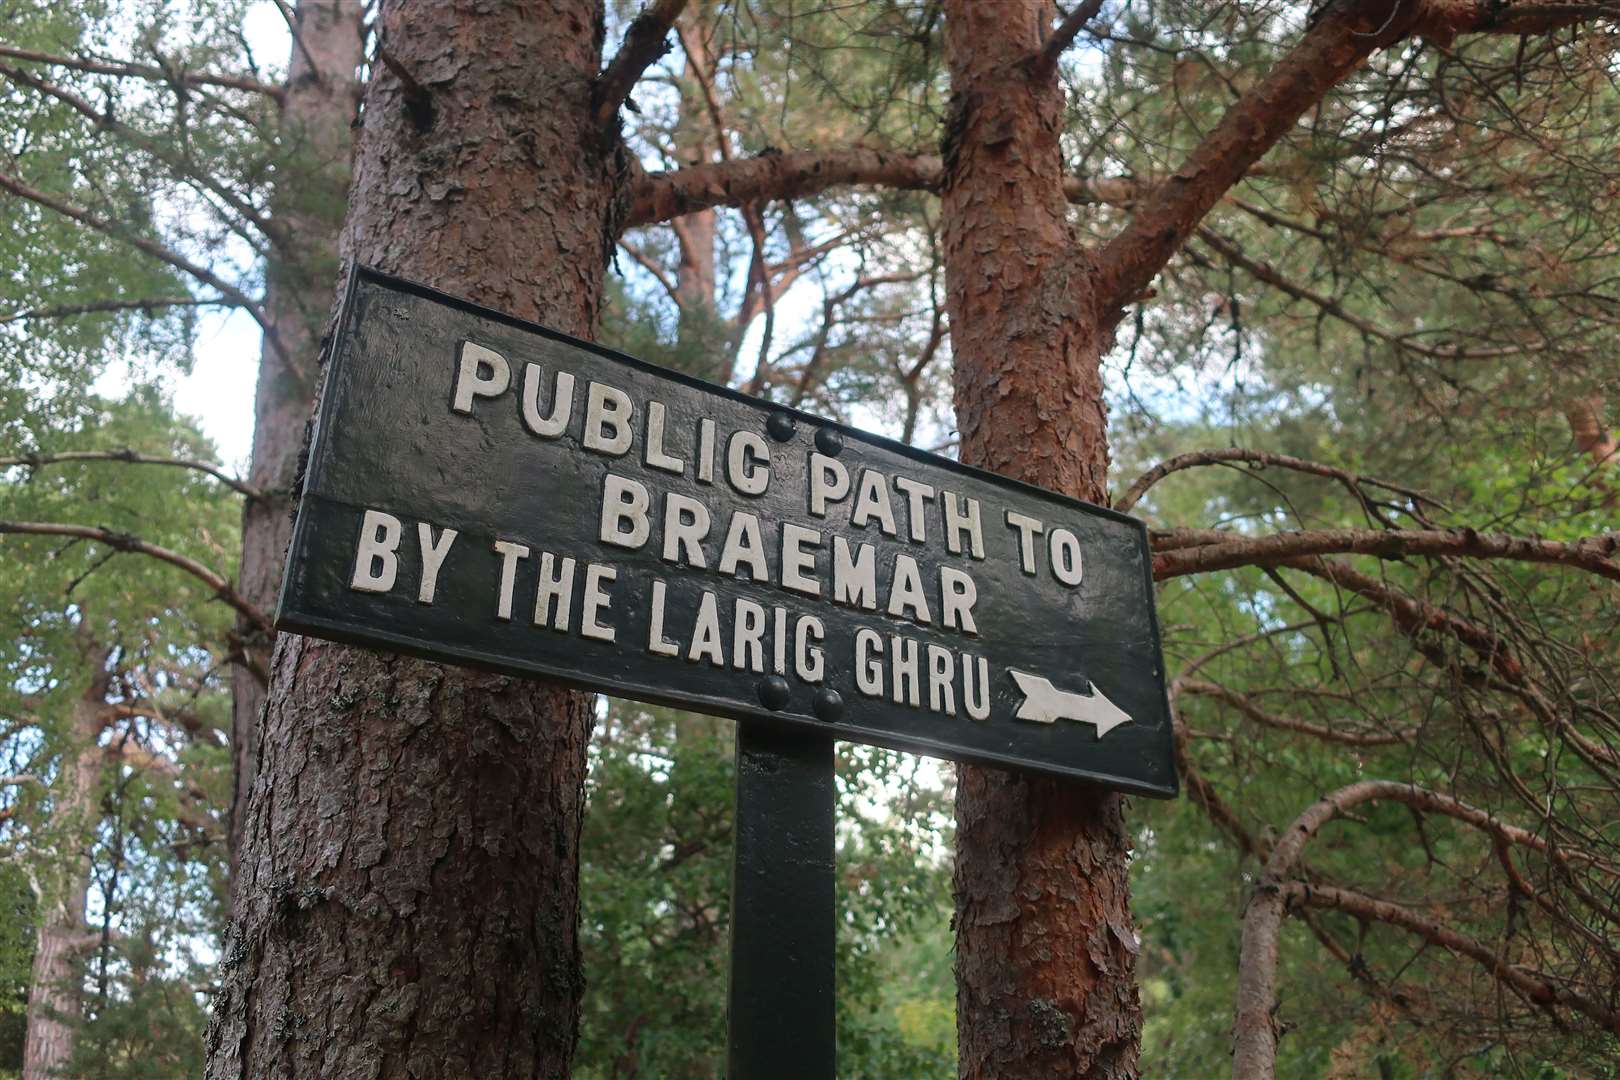 An early right of way sign at Coylumbridge points back to Braemar.